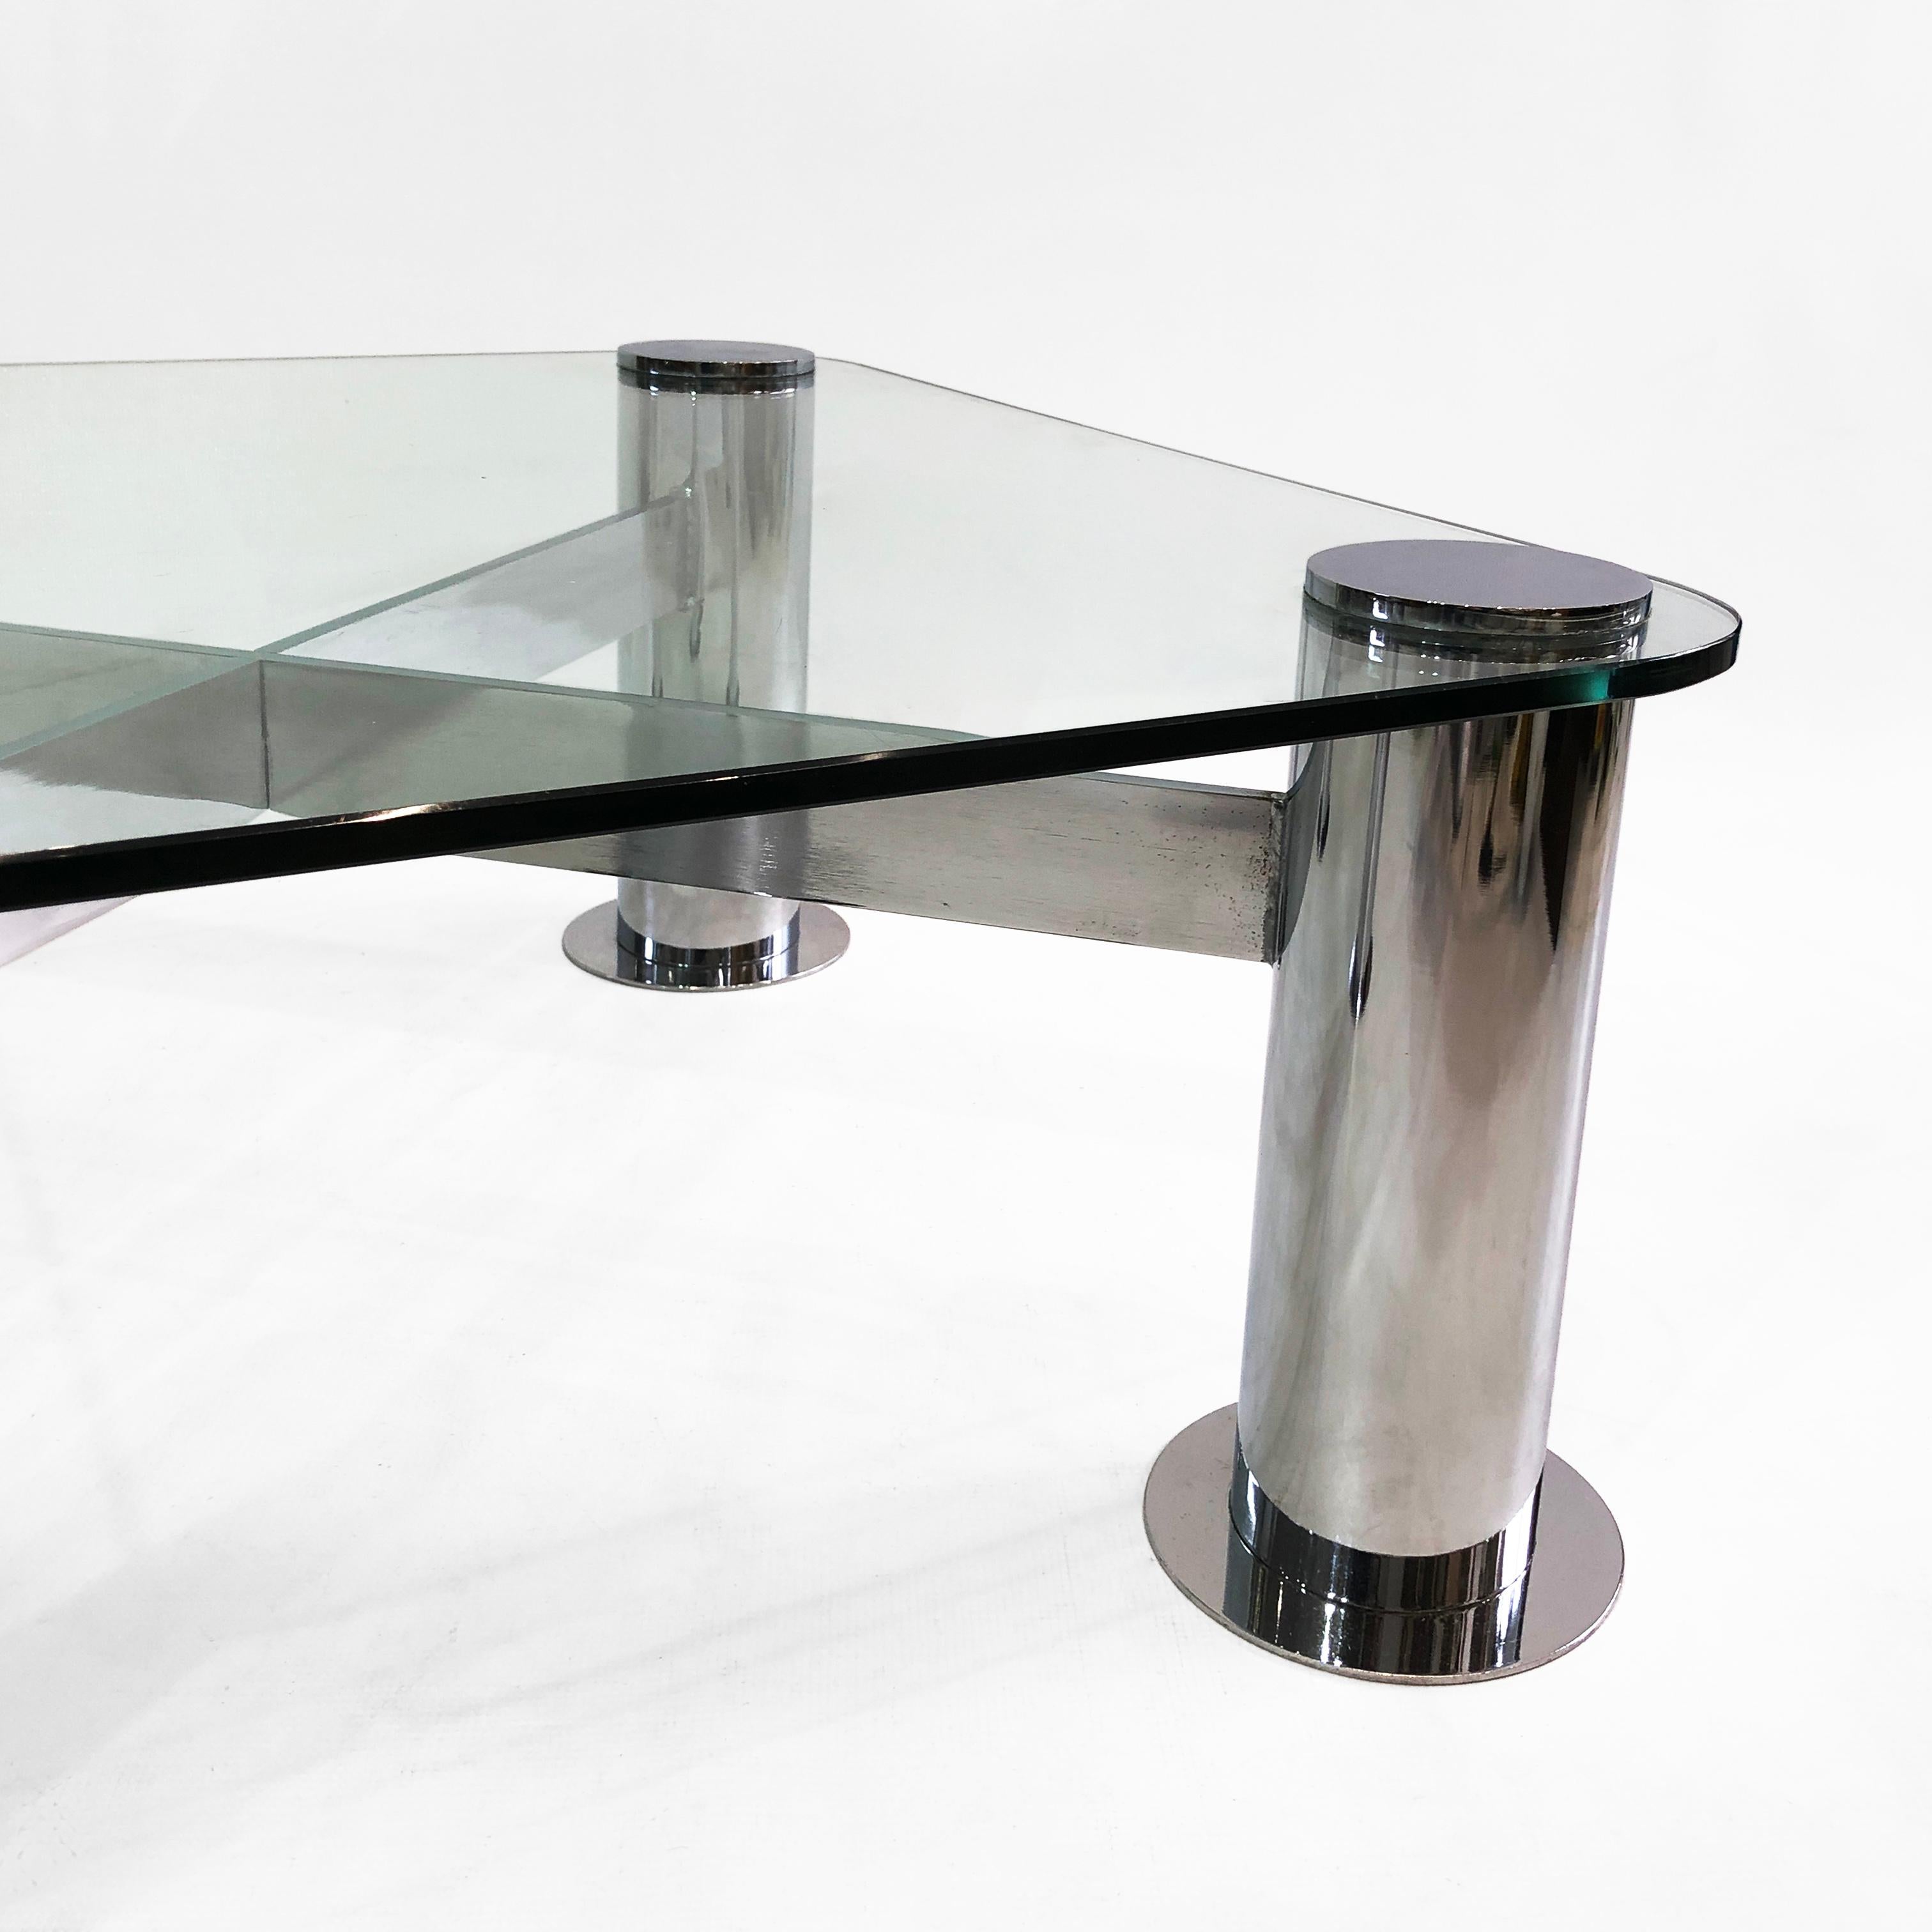 Steel Pace Postmodern Chrome Glass Coffee Table 1970s Vintage Retro Leon Rosen Style For Sale